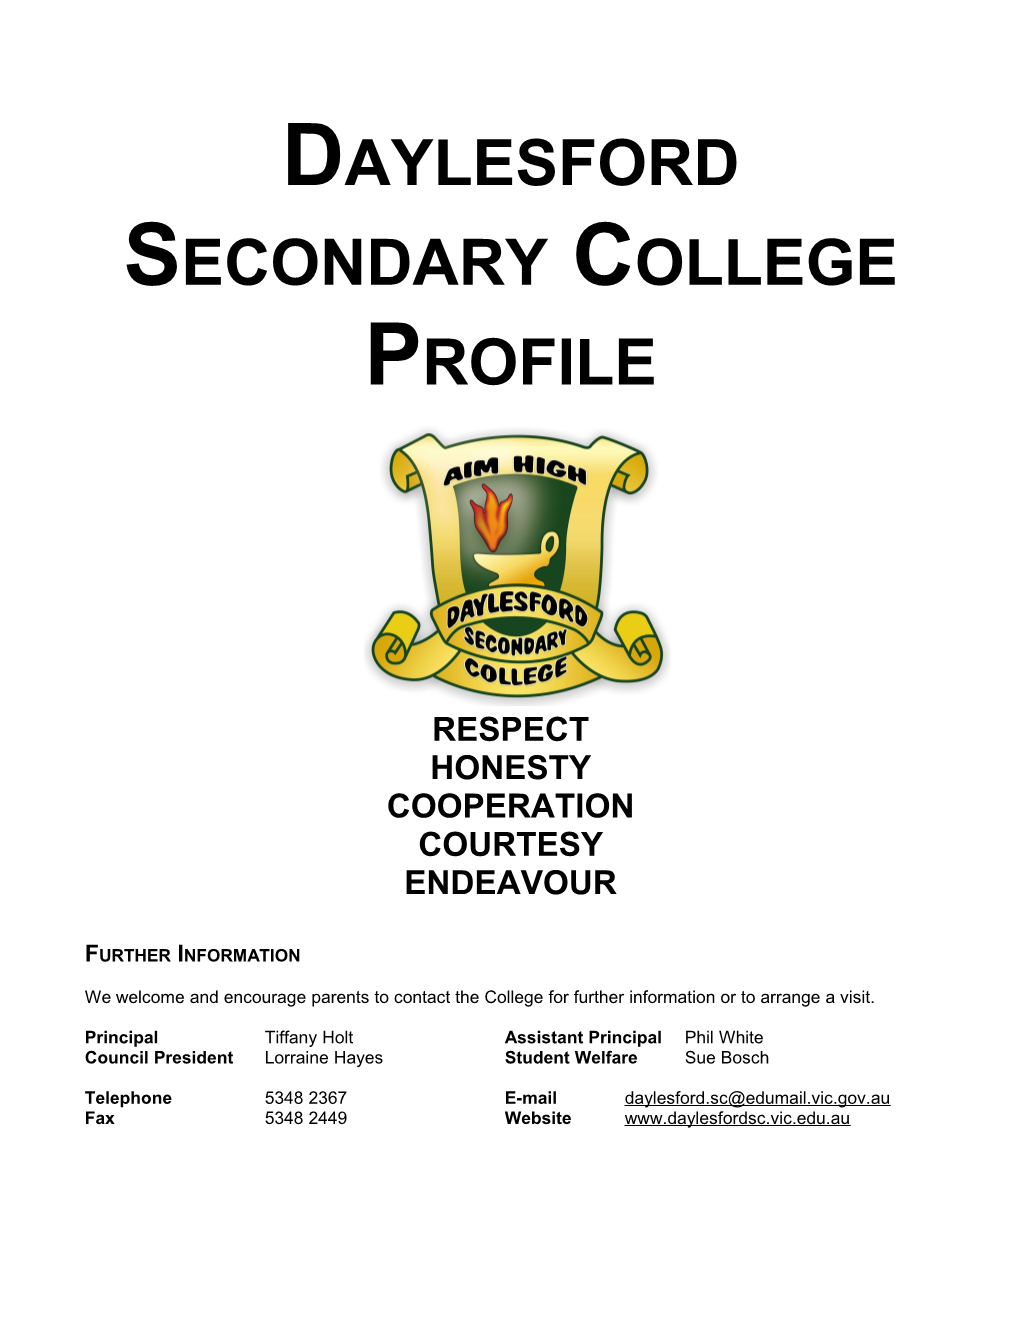 Daylesford Secondary College Profile